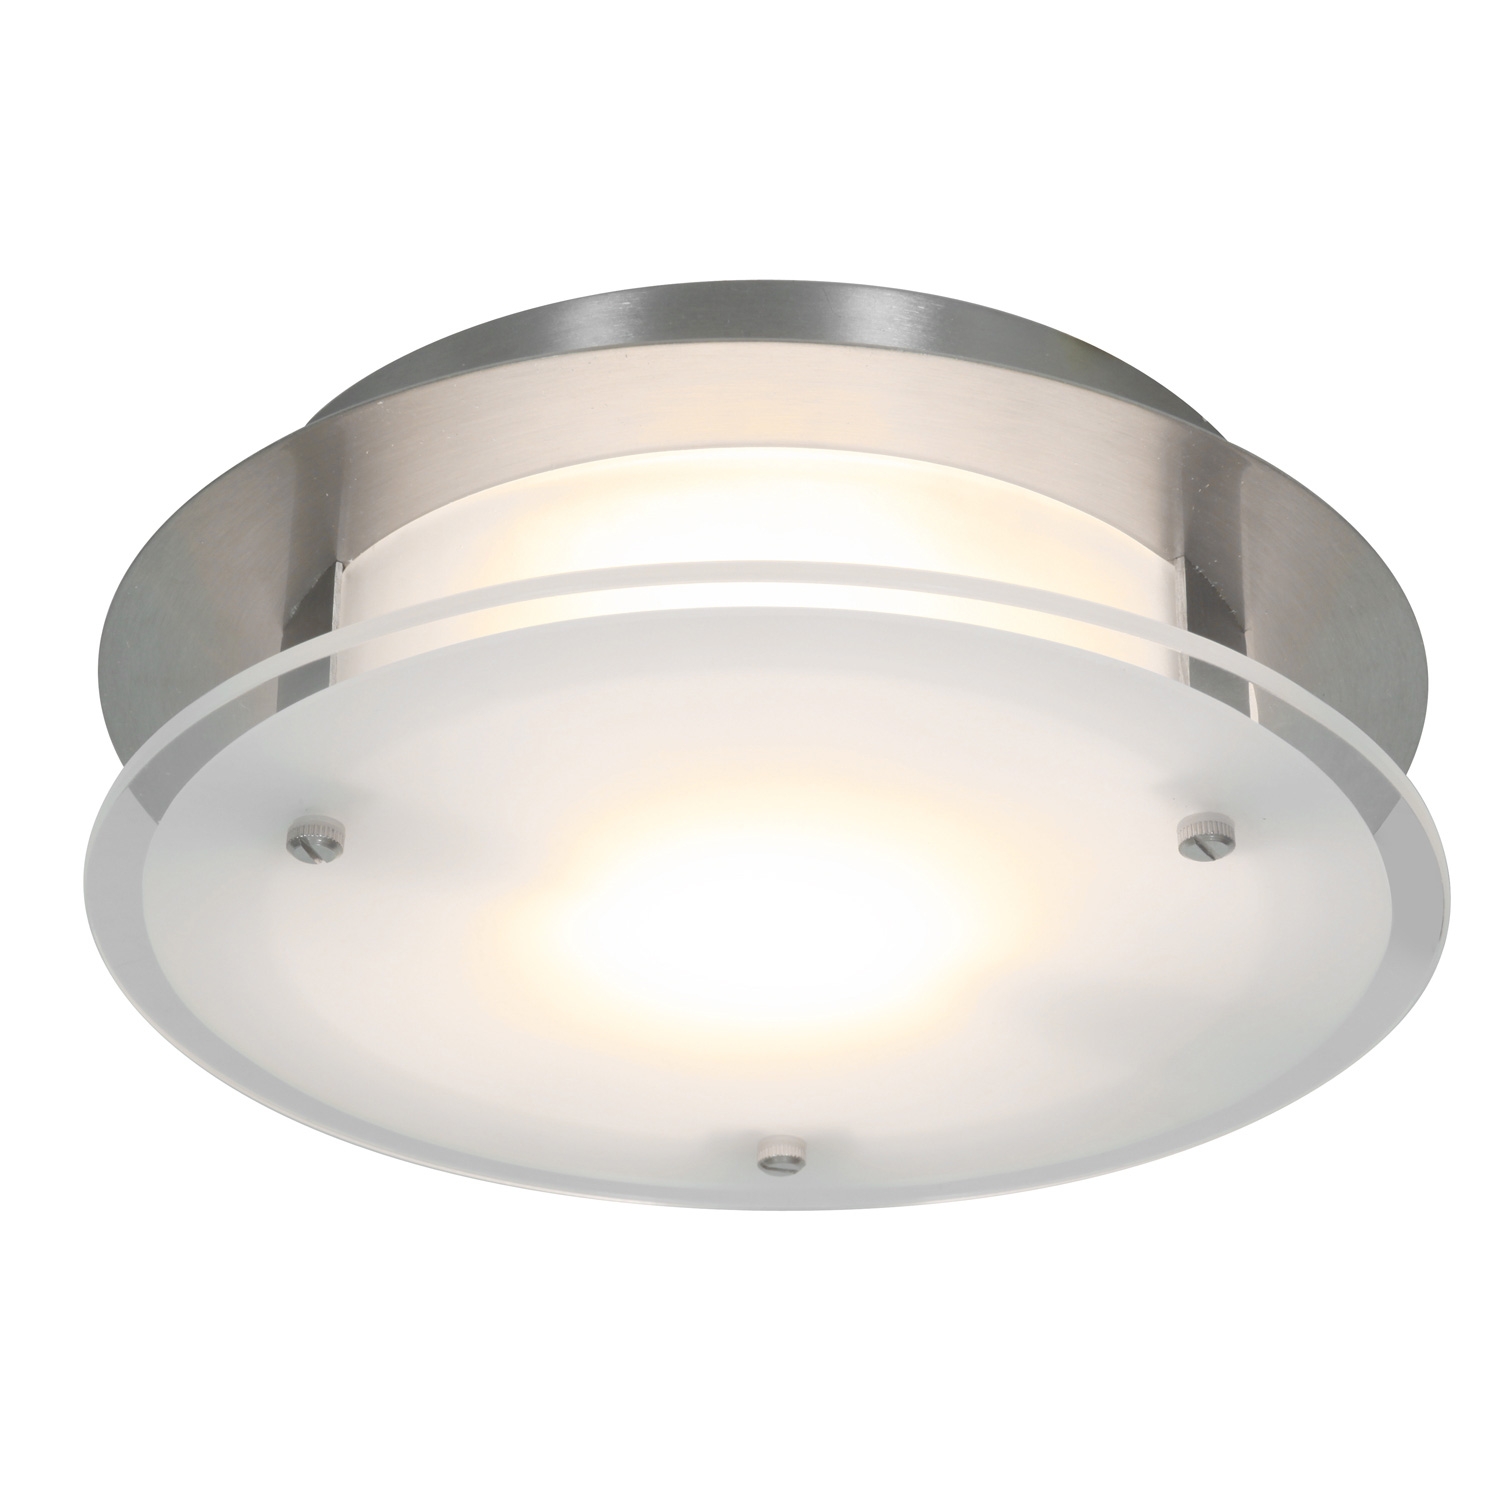 Round Ceiling Exhaust Fan With Light